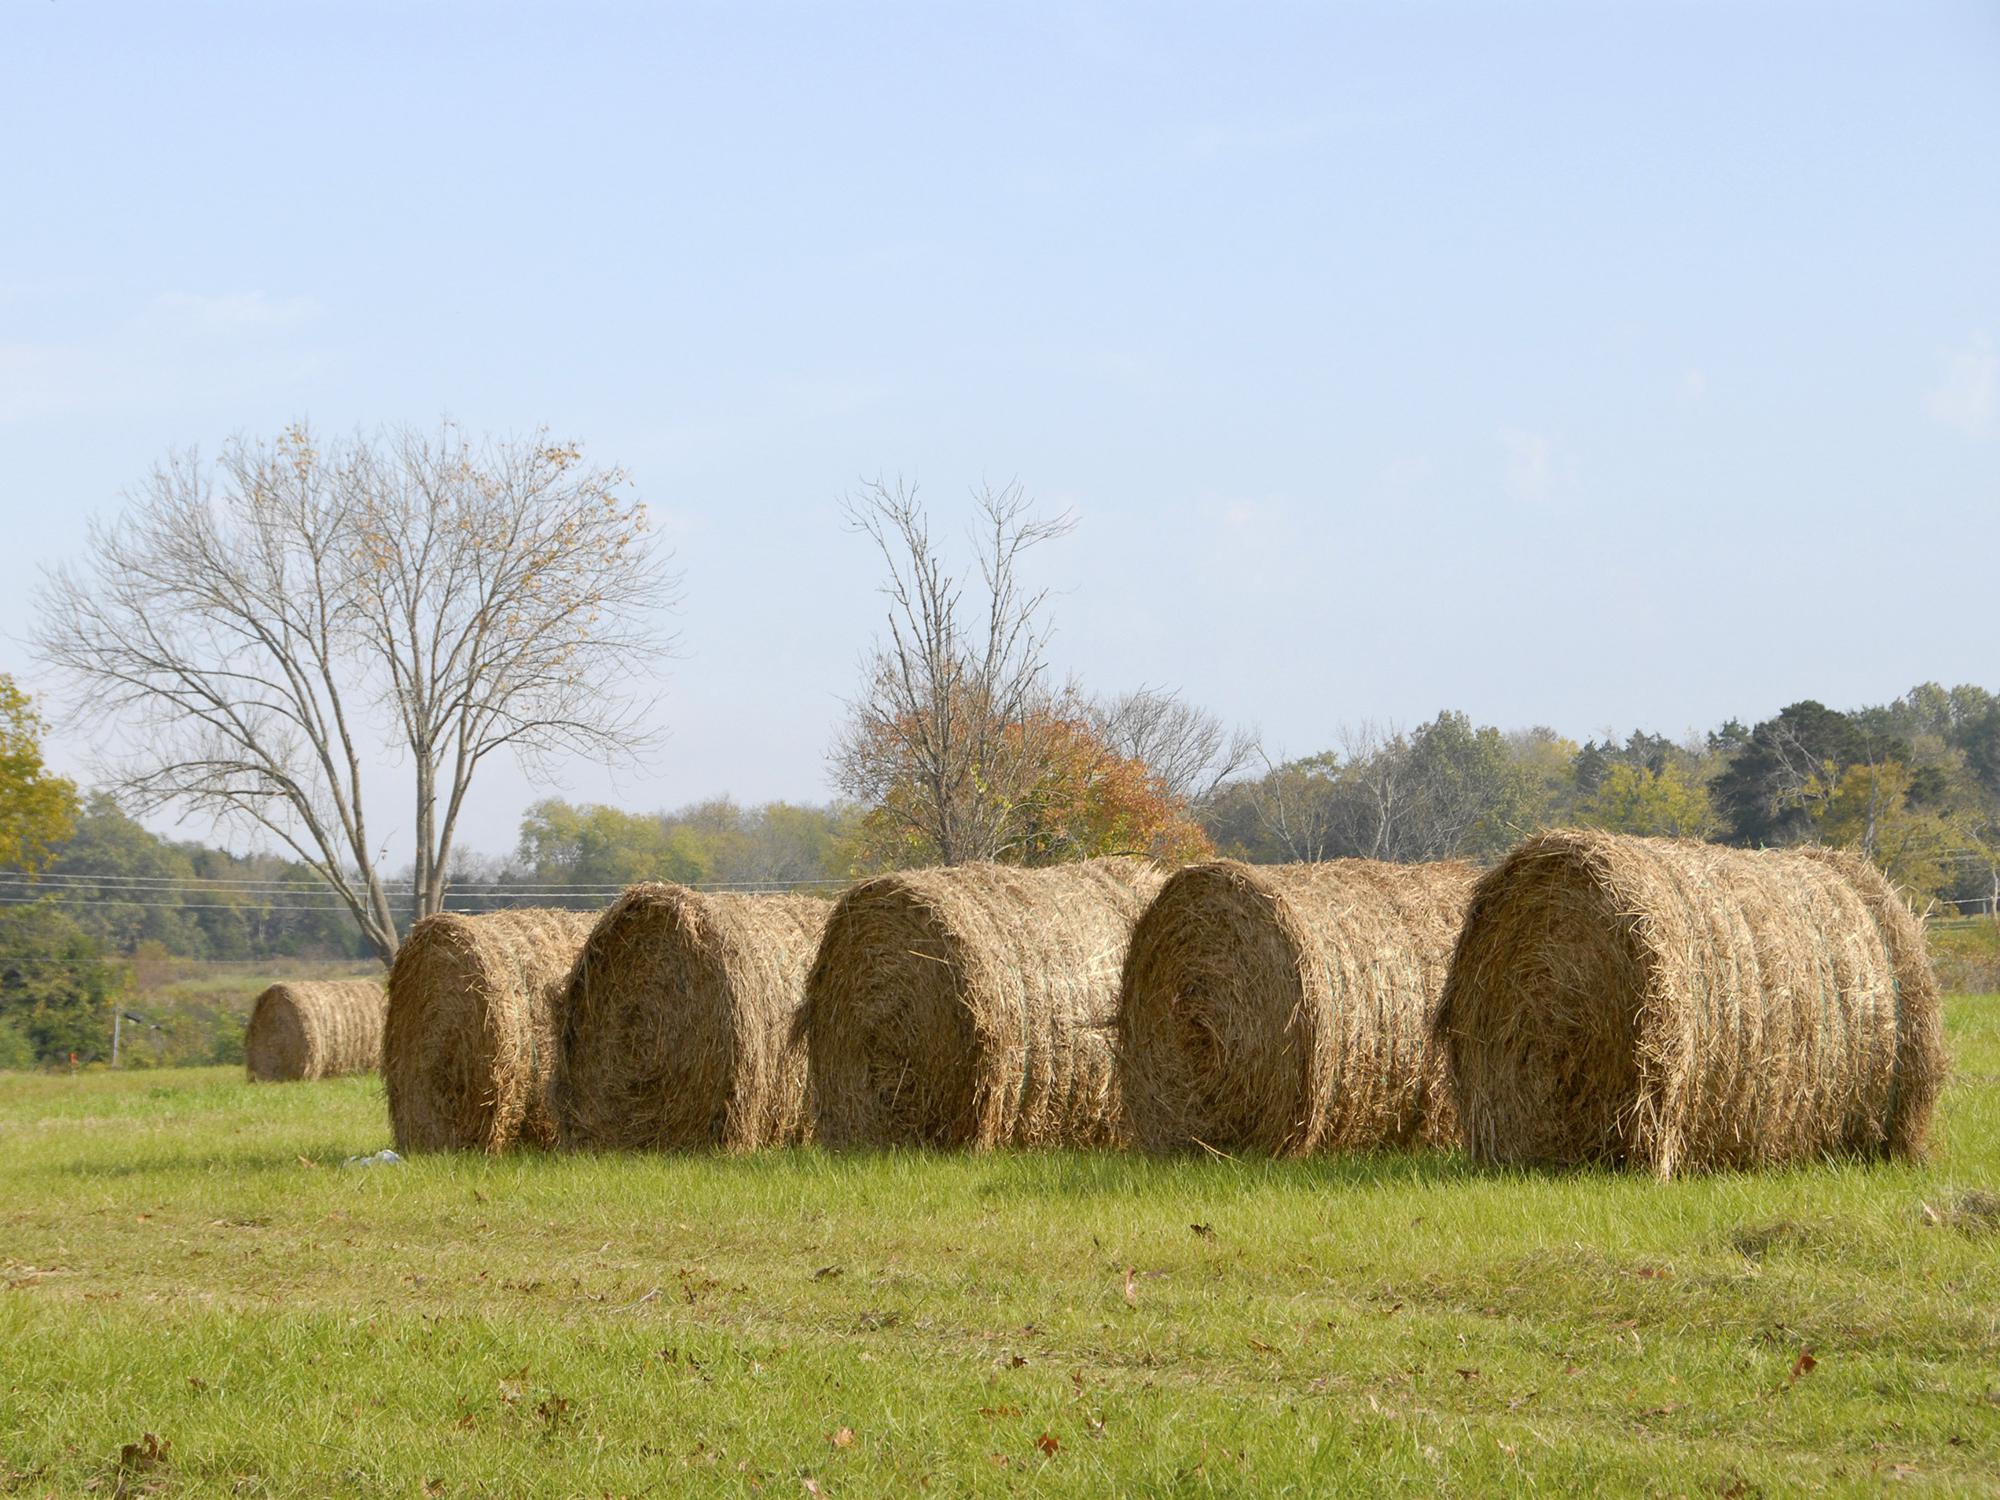 A grower in Oktibbeha County, Miss., has hay bales in the field and fall grasses already coming up on Oct. 26, 2012. This year's hay crop has the potential to be the fourth most valuable crop in the state, behind soybeans, corn and cotton. (Photo by MSU Ag Communications/Tim McAlavy)